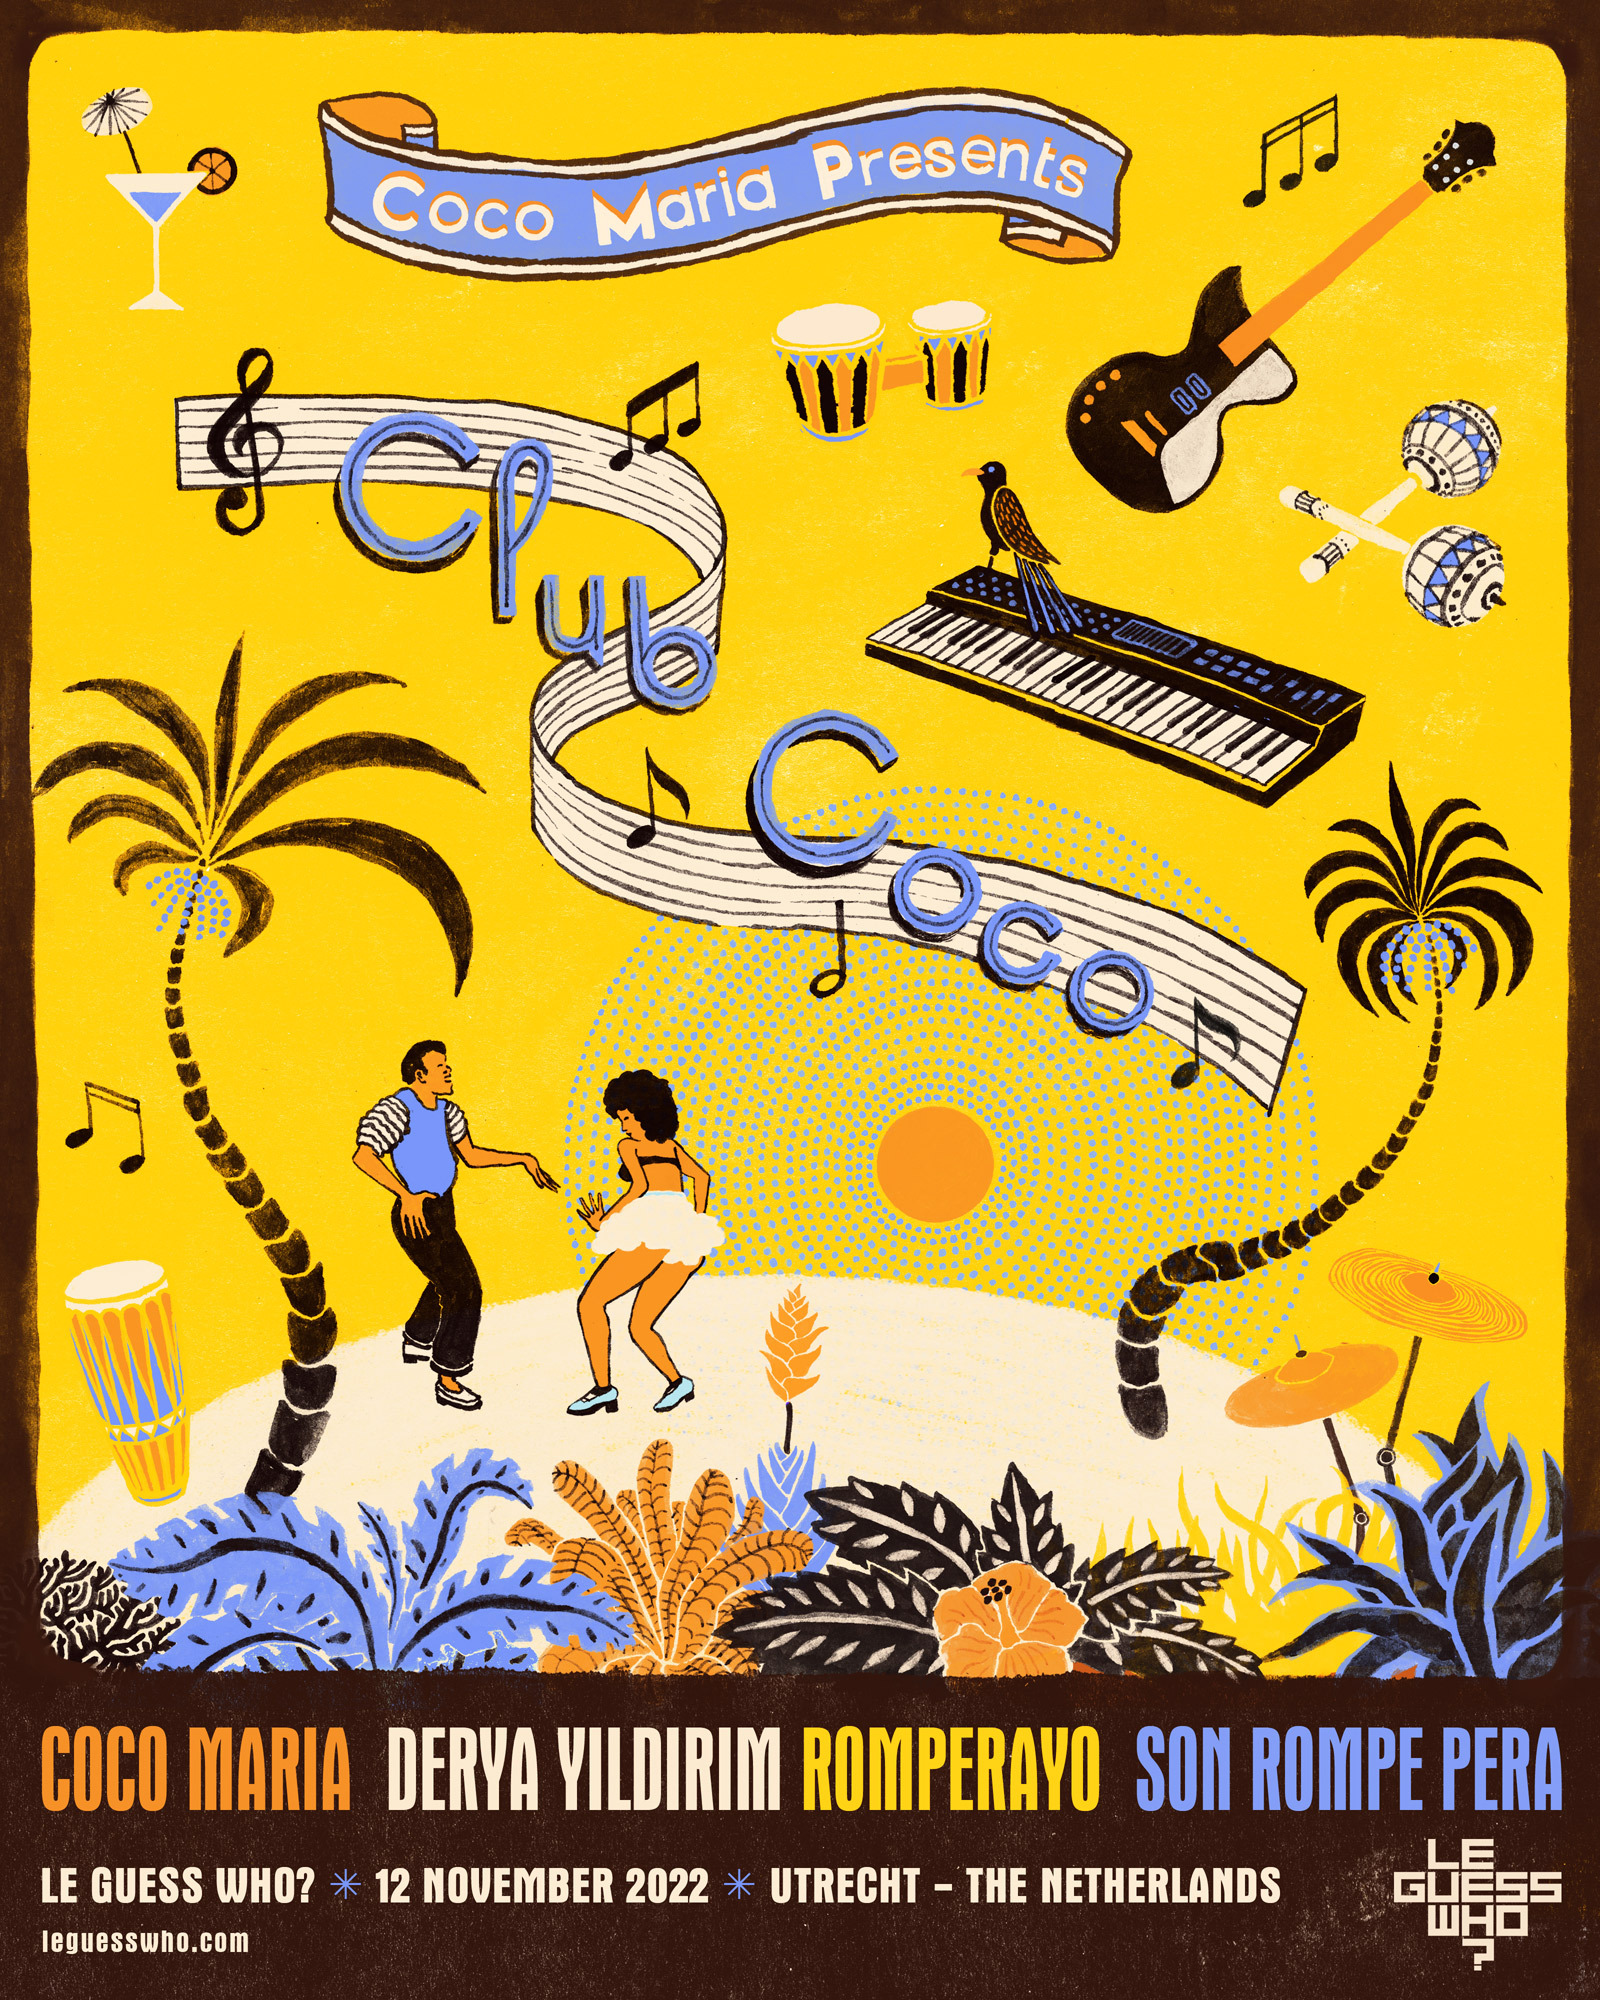 Coco María presents Club Coco: vital new music influenced by vintage sounds